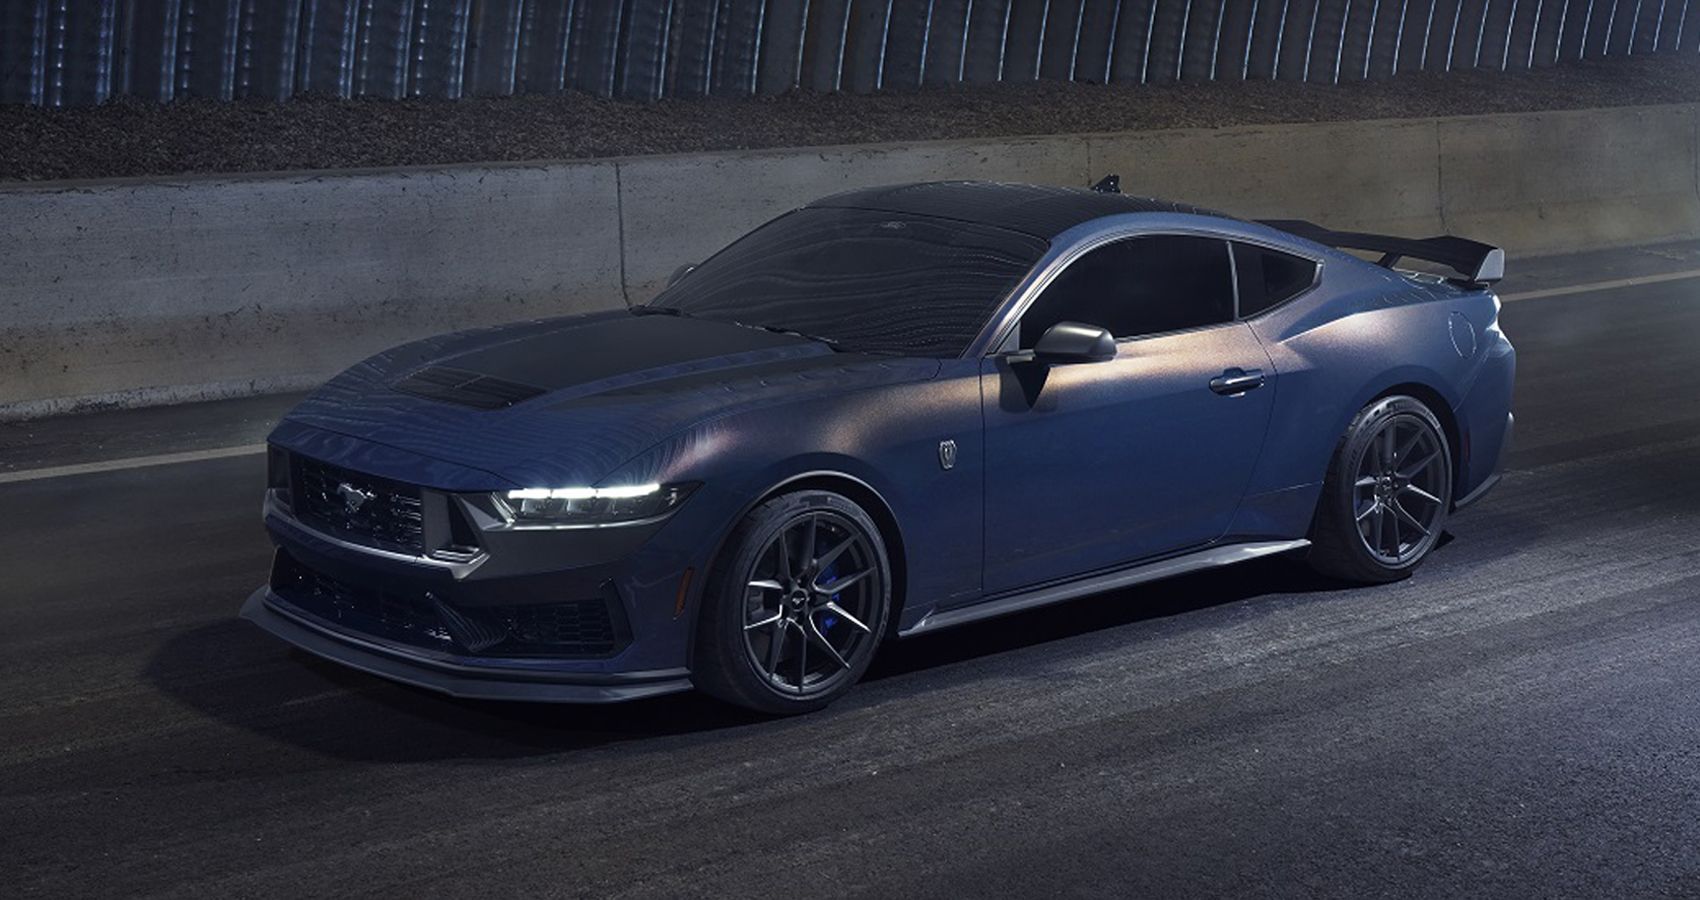 2024 Ford Mustang Dark Horse: Most Powerful 5.0-Liter V8 Ever With 500 Horsepower